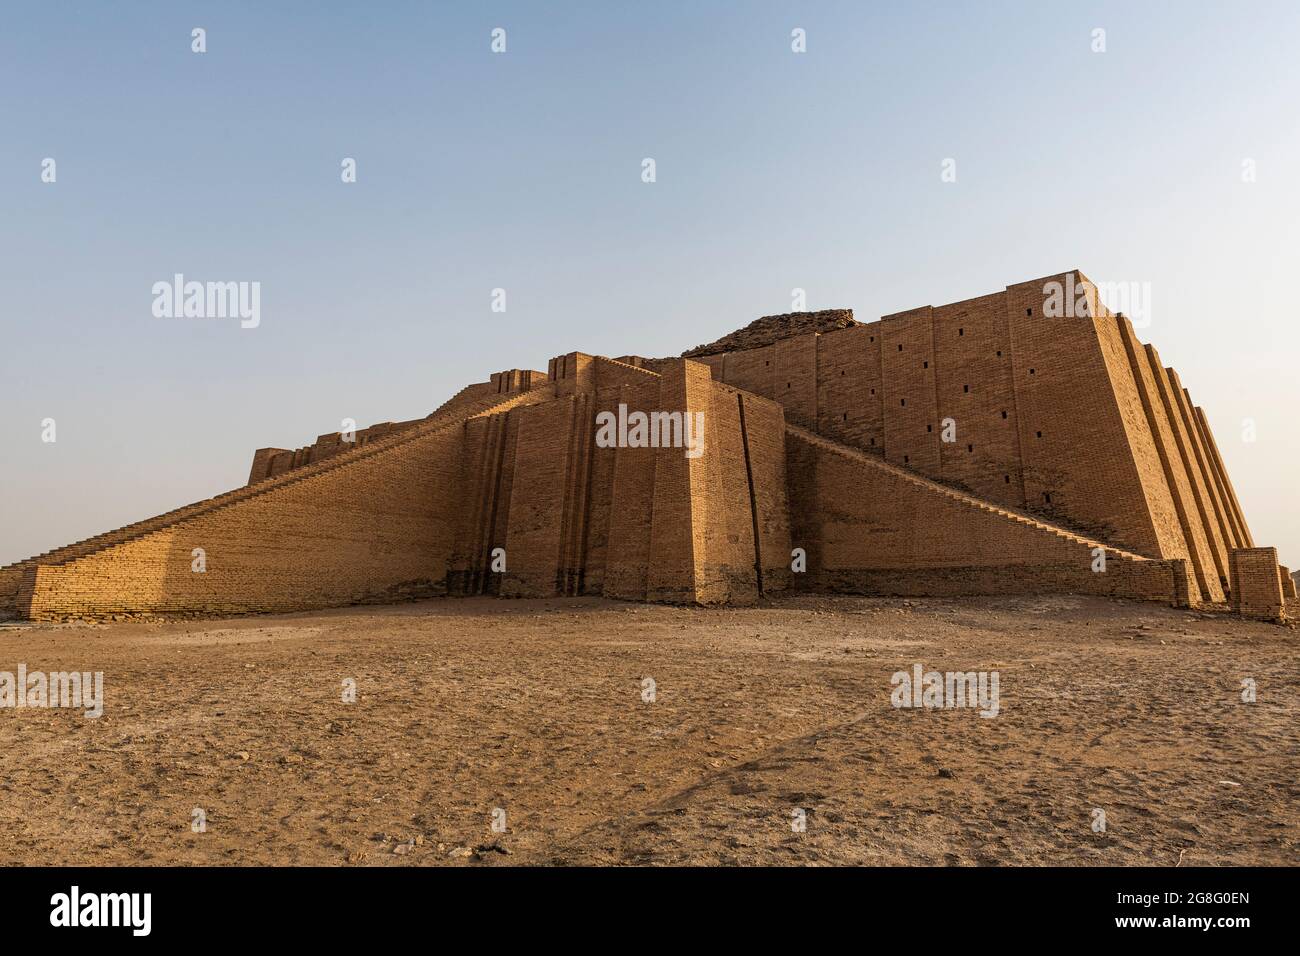 Ziggurat, ancient city of Ur, The Ahwar of Southern Iraq, UNESCO World Heritage Site, Iraq, Middle East Stock Photo